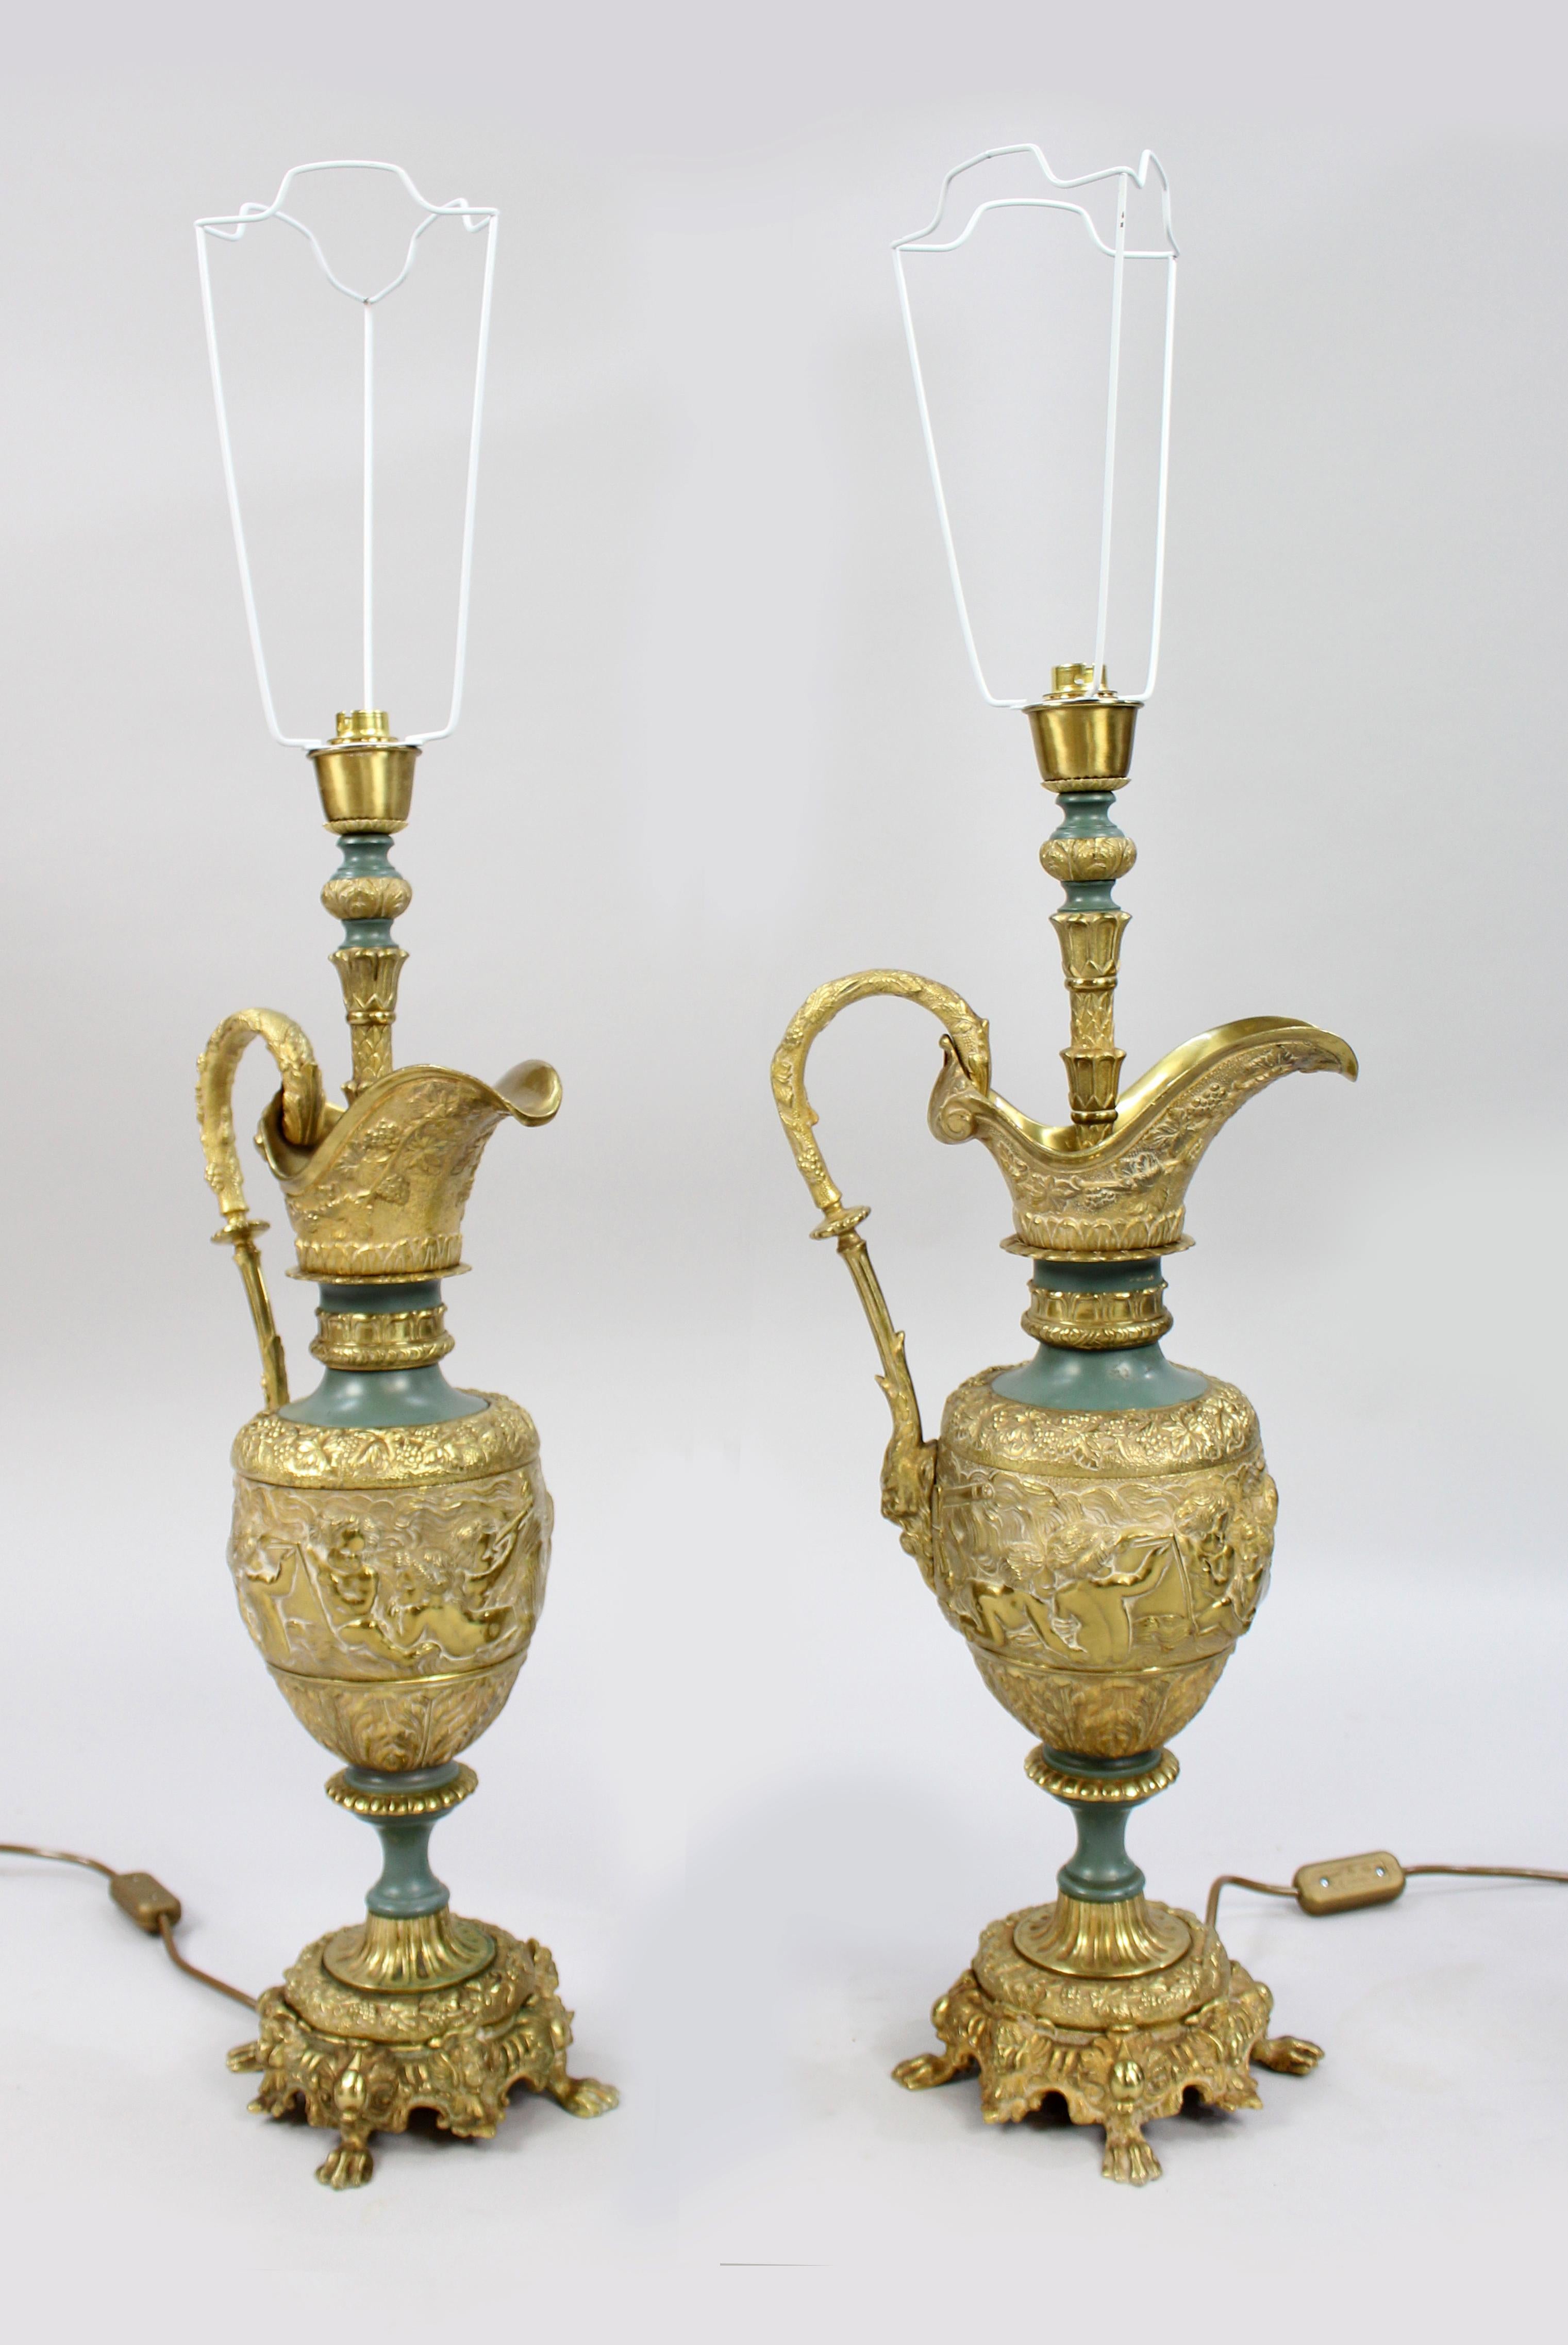 Pair of antique ormolu ewer form table lamps


Period c.1890

Heavy gilded brass bodies in the form of ewers, profusely worked 

Measures: Width 26 cm / 10 in

Depth 20 cm / 8 in

Height (excluding shade carrier) 63 cm / 25